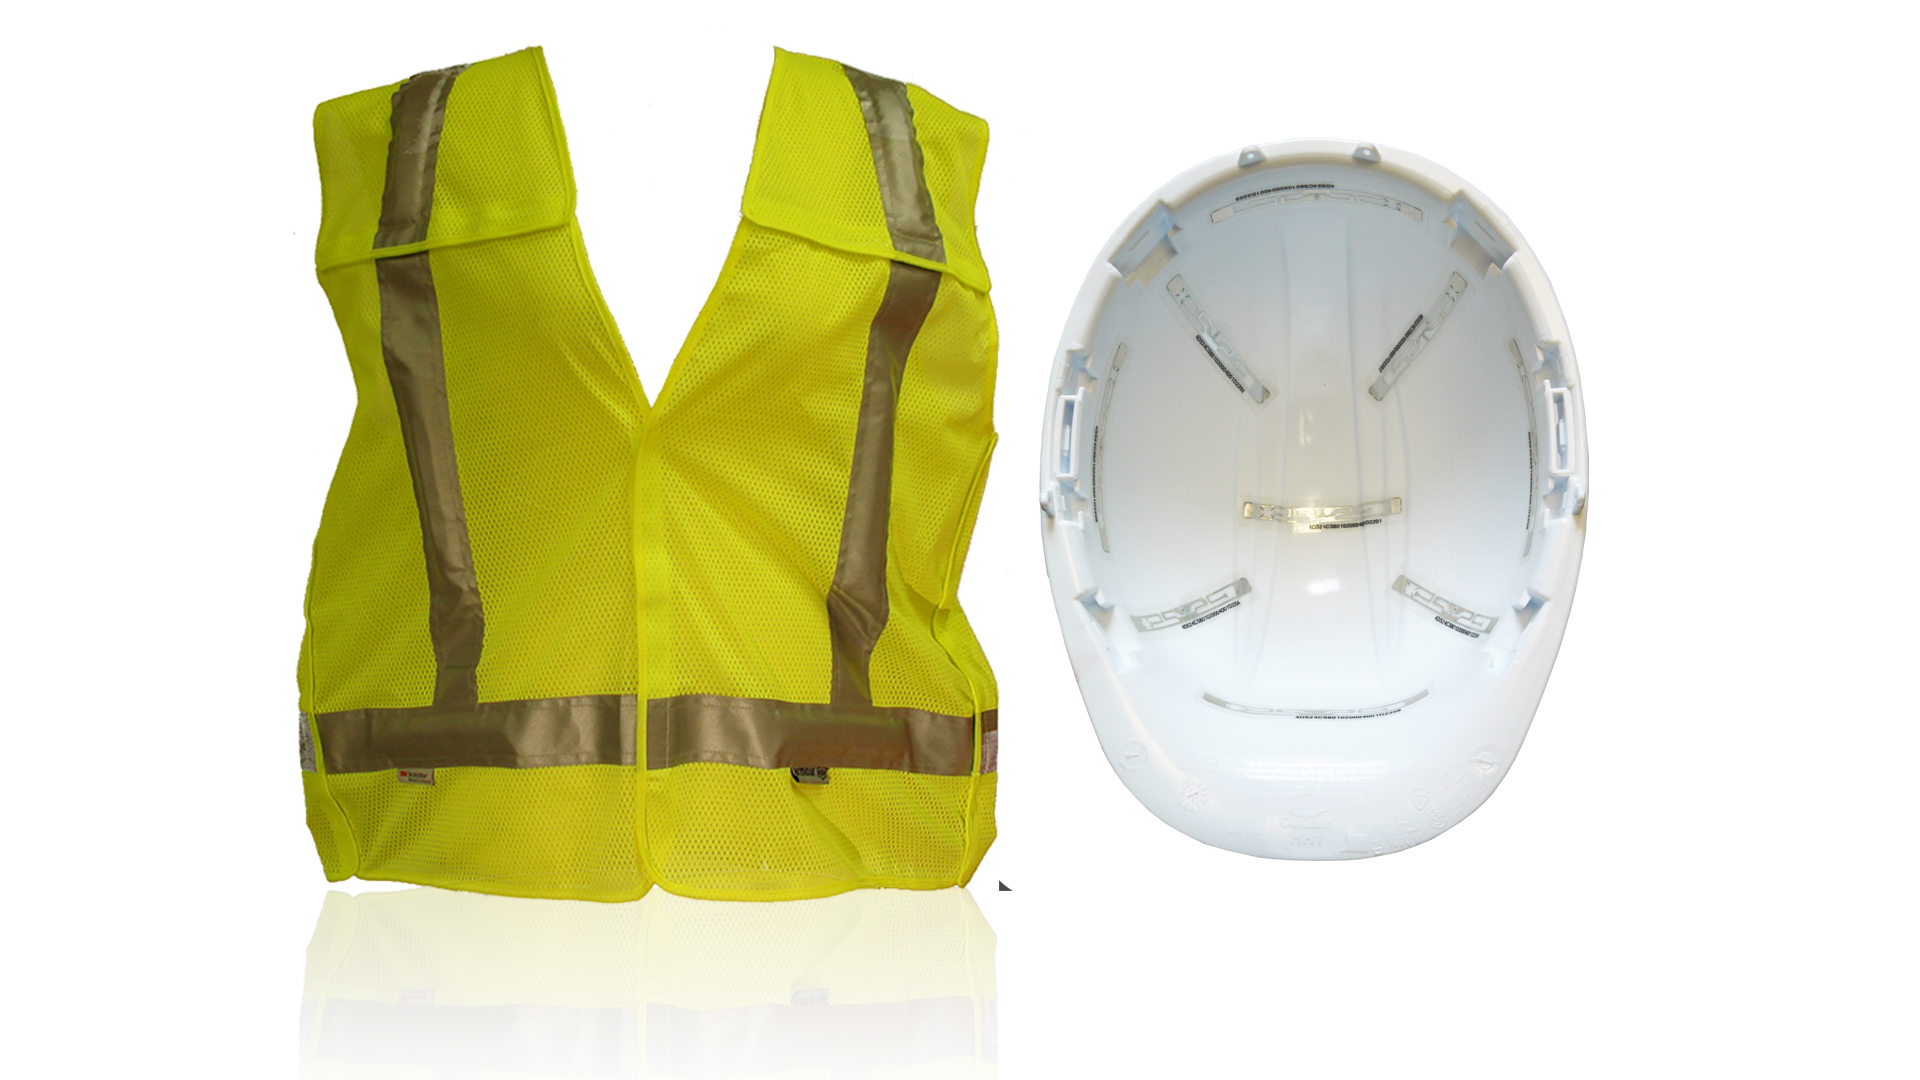 Passive RFID Safety Apparel Vest Hard Hat Kit workers wear to be detected on a jobsite in the danger back up zone of heavy mobile equipment